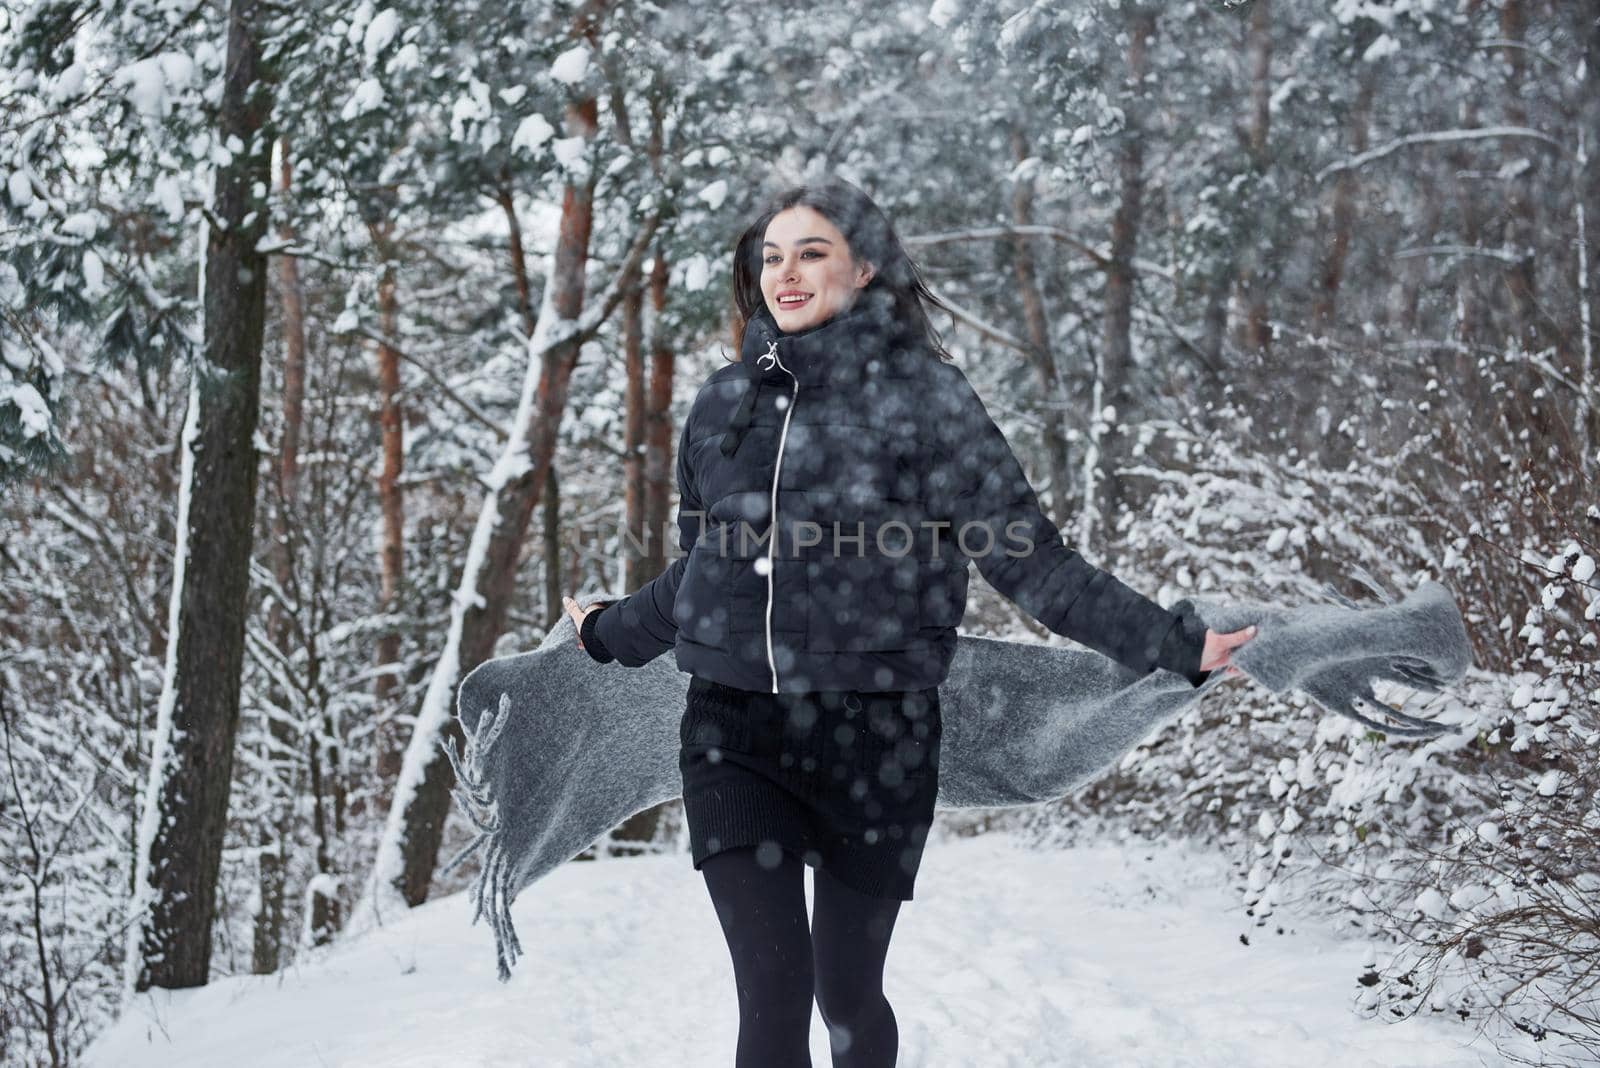 Running forward. Portrait of charming woman in the black jacket and grey scarf in the winter forest.